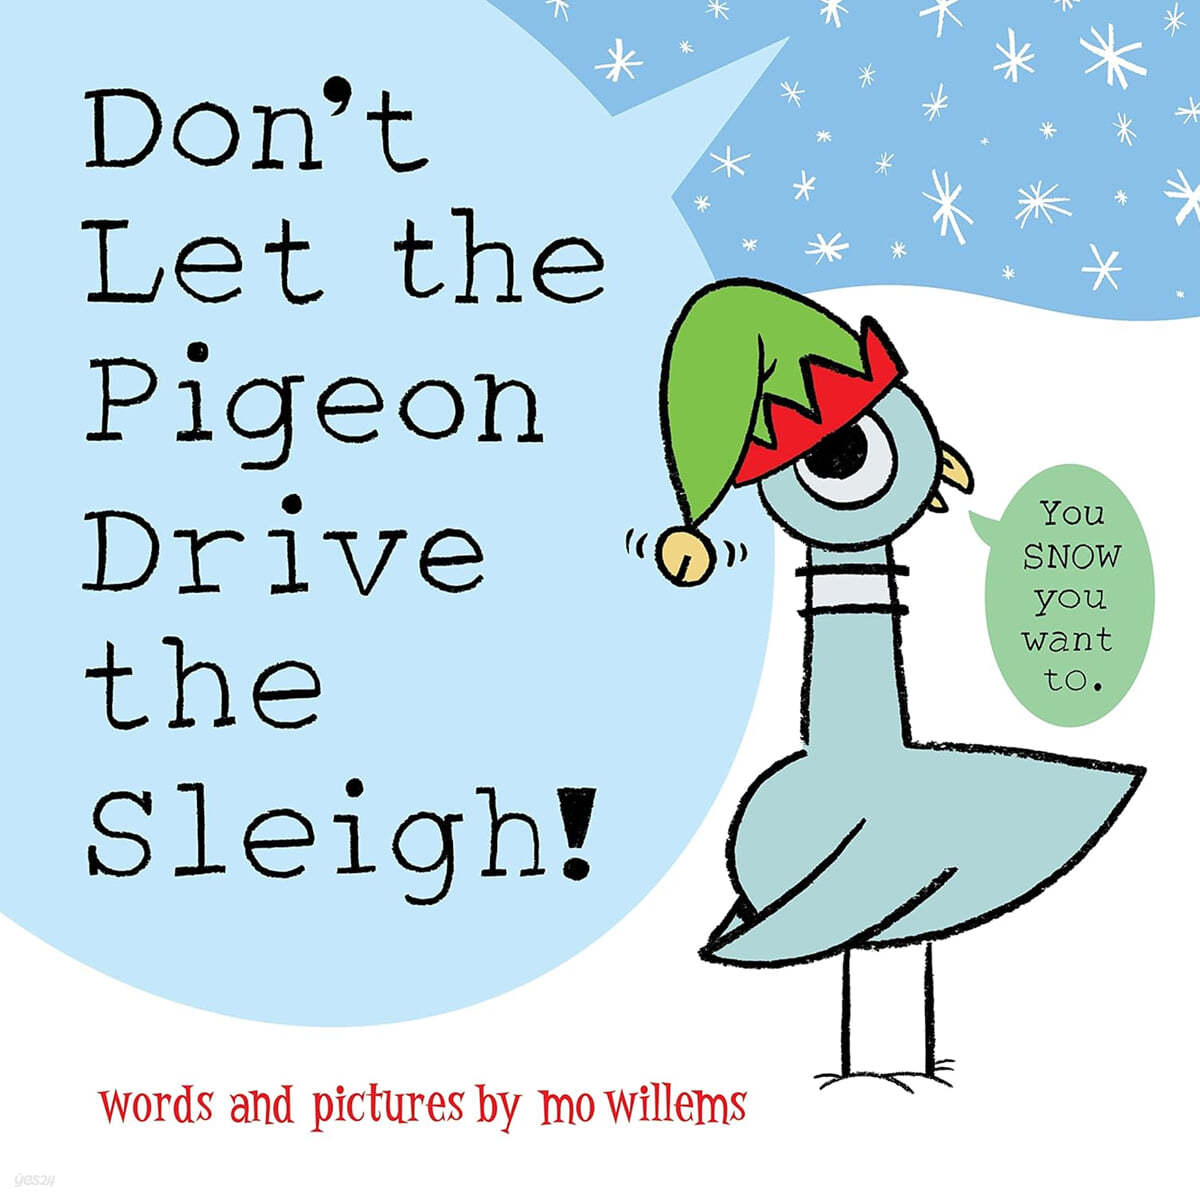 Don’t Let the Pigeon Drive the Sleigh!